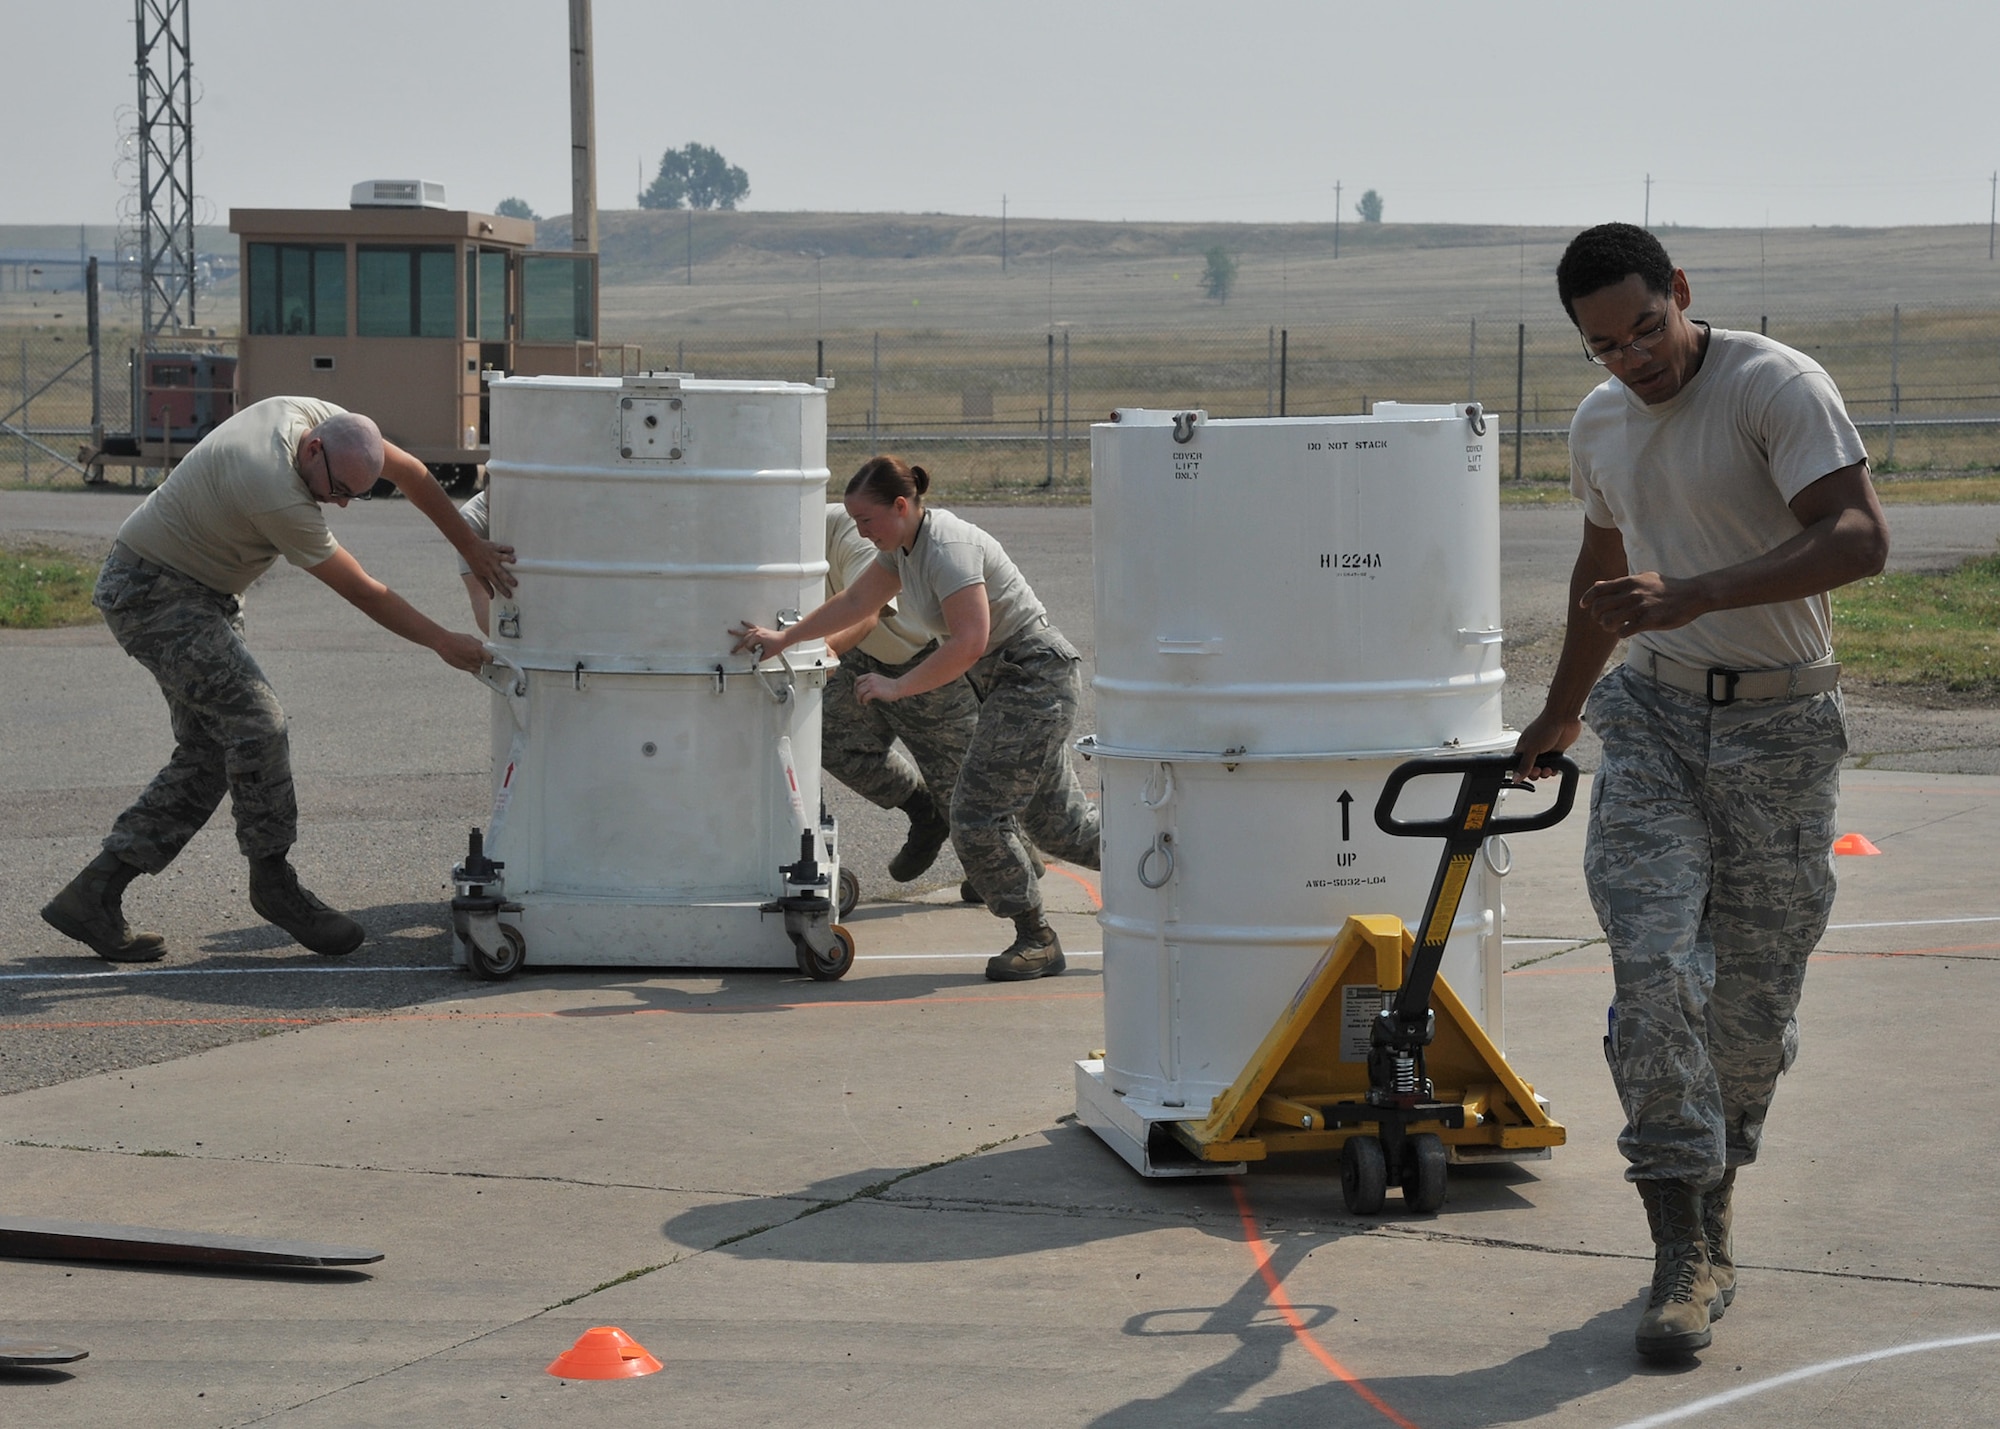 Staff Sgt. Sean Glenn, 341st Munitions Squadron, pulls an empty warhead storage container through a serpentine course Aug. 25, 2015, at the Malmstrom Air Force Base, Mont., weapons storage area as his Global Strike Challenge 2015 teammates push a second ‘can’ to the course finish line. The team was practicing for a ‘handling rodeo,’ a timed event in Air Force Global Strike Command’s ICBM maintenance competition and one of three events that the 341st Missile Wing’s GSC 2015 MUNS team will compete in Sept. 2-4. The results will be revealed in October and compared to similar teams from Minot AFB, N.D., and F.E. Warren AFB, Wyo. (U.S. Air Force photo/John Turner)